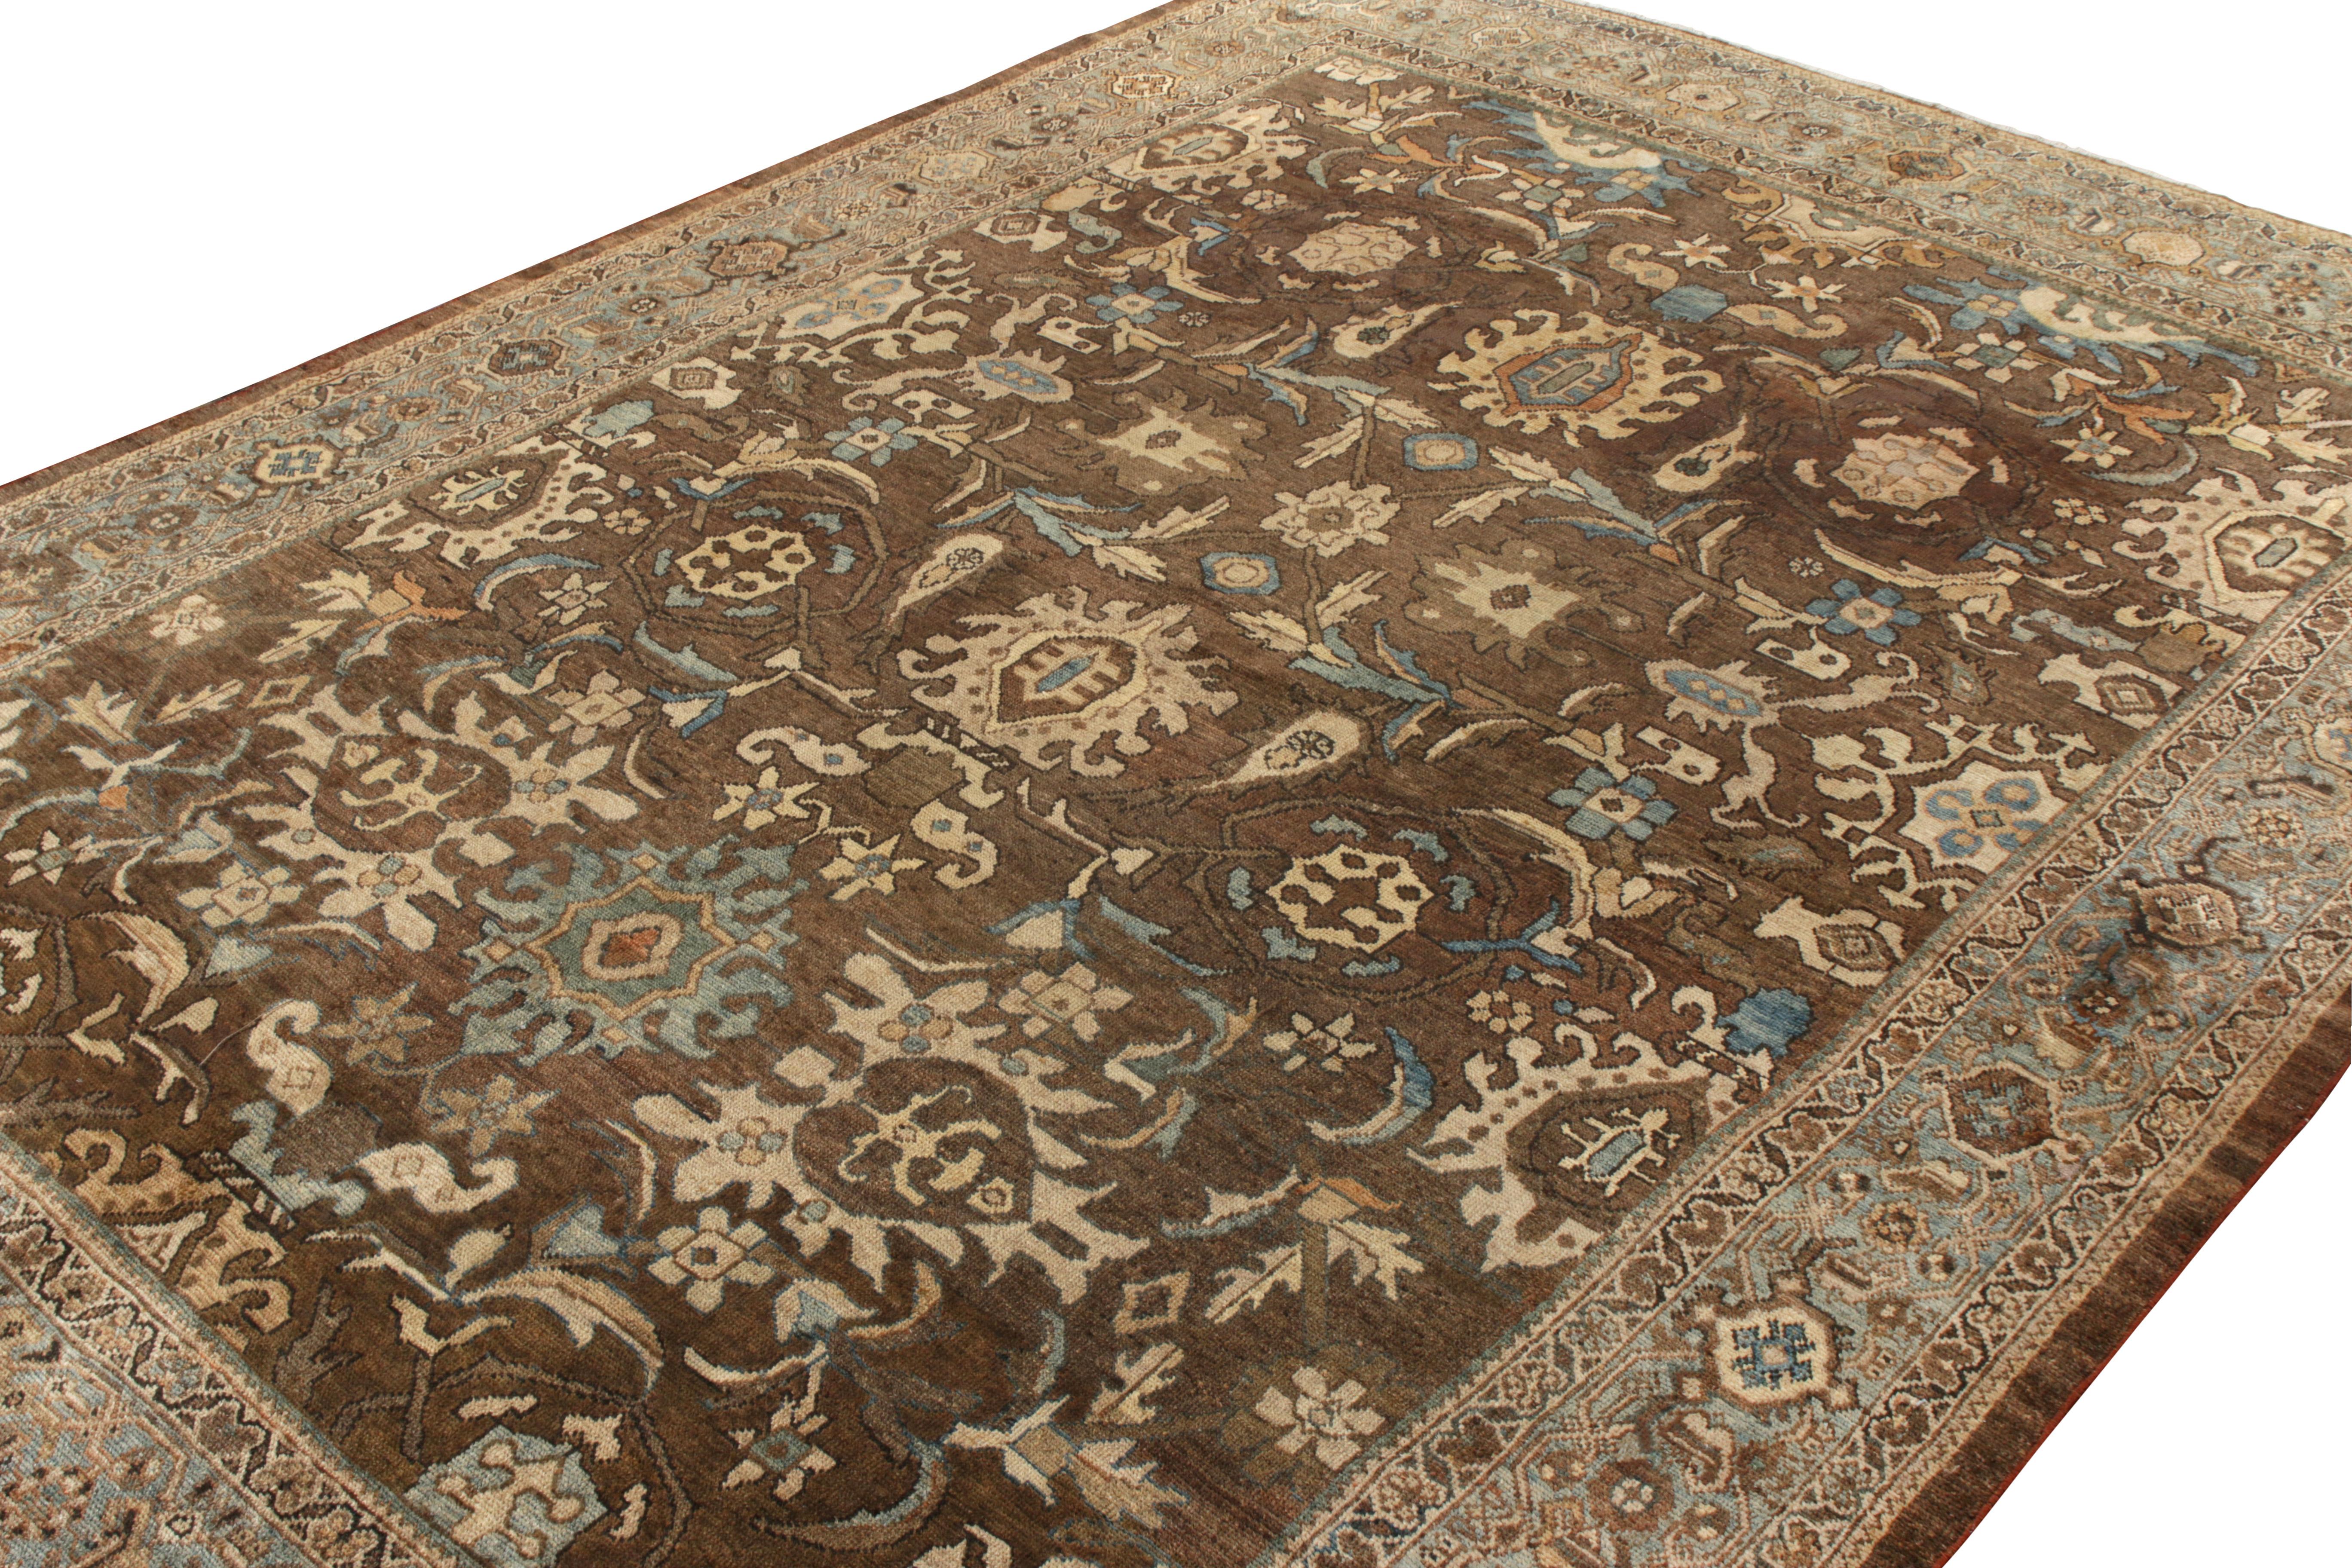 Hand-knotted in wool, an antique Mahal rug originating from Persia circa 1920-1930. Joining Rug & Kilim’s Antique & Vintage collection, the 8x12 piece enjoys a medley of geometric and floral designs in rare tones of beige, brown, and blue rarely